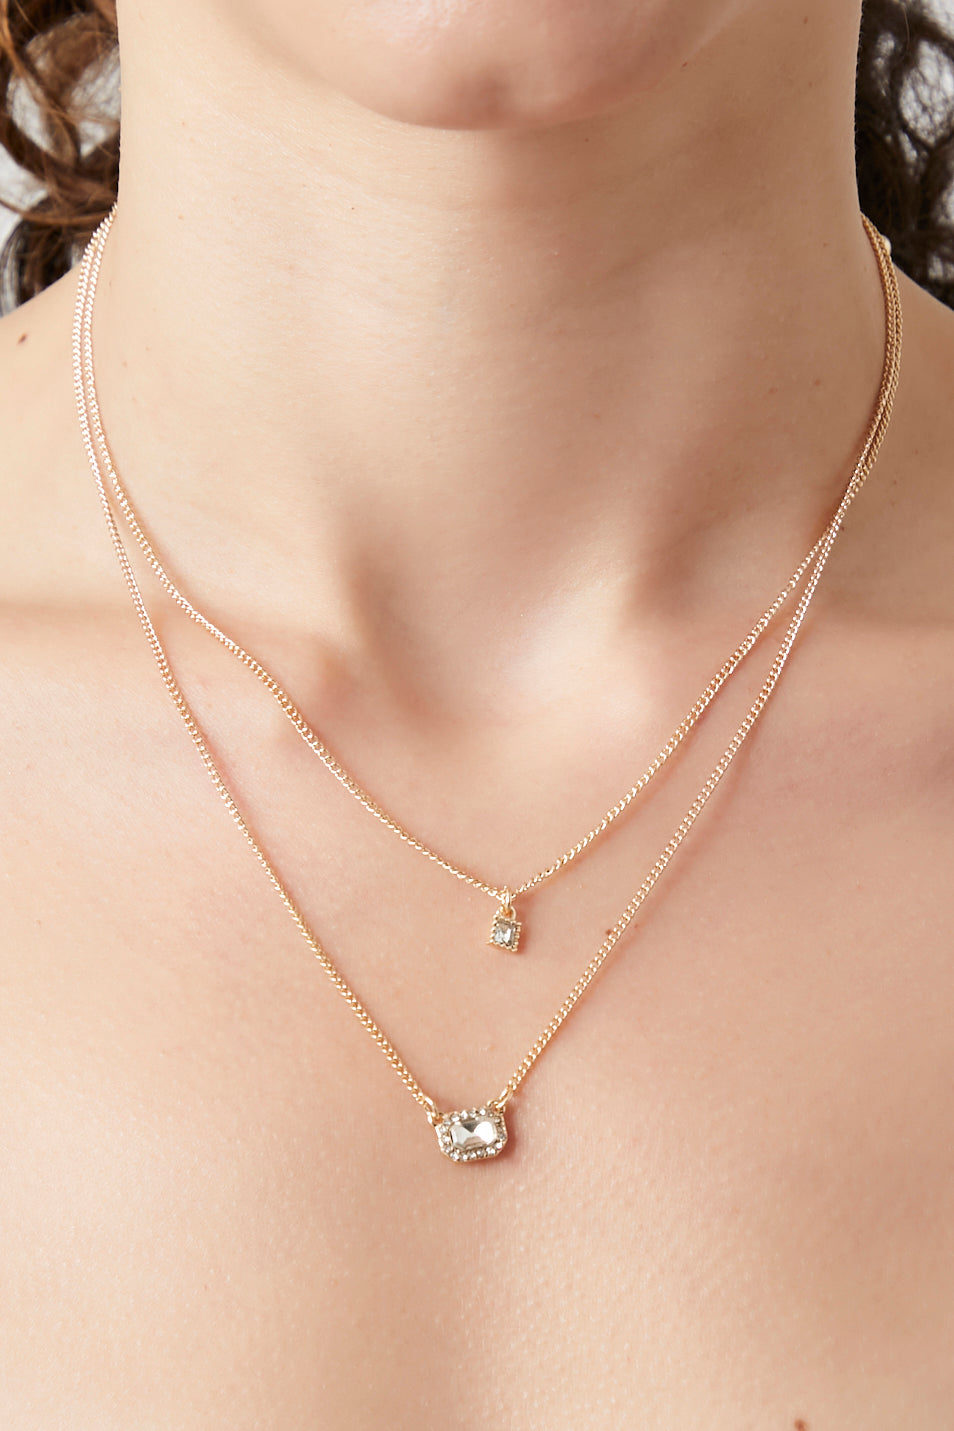 Gold/clear Layered Faux Stone Necklace